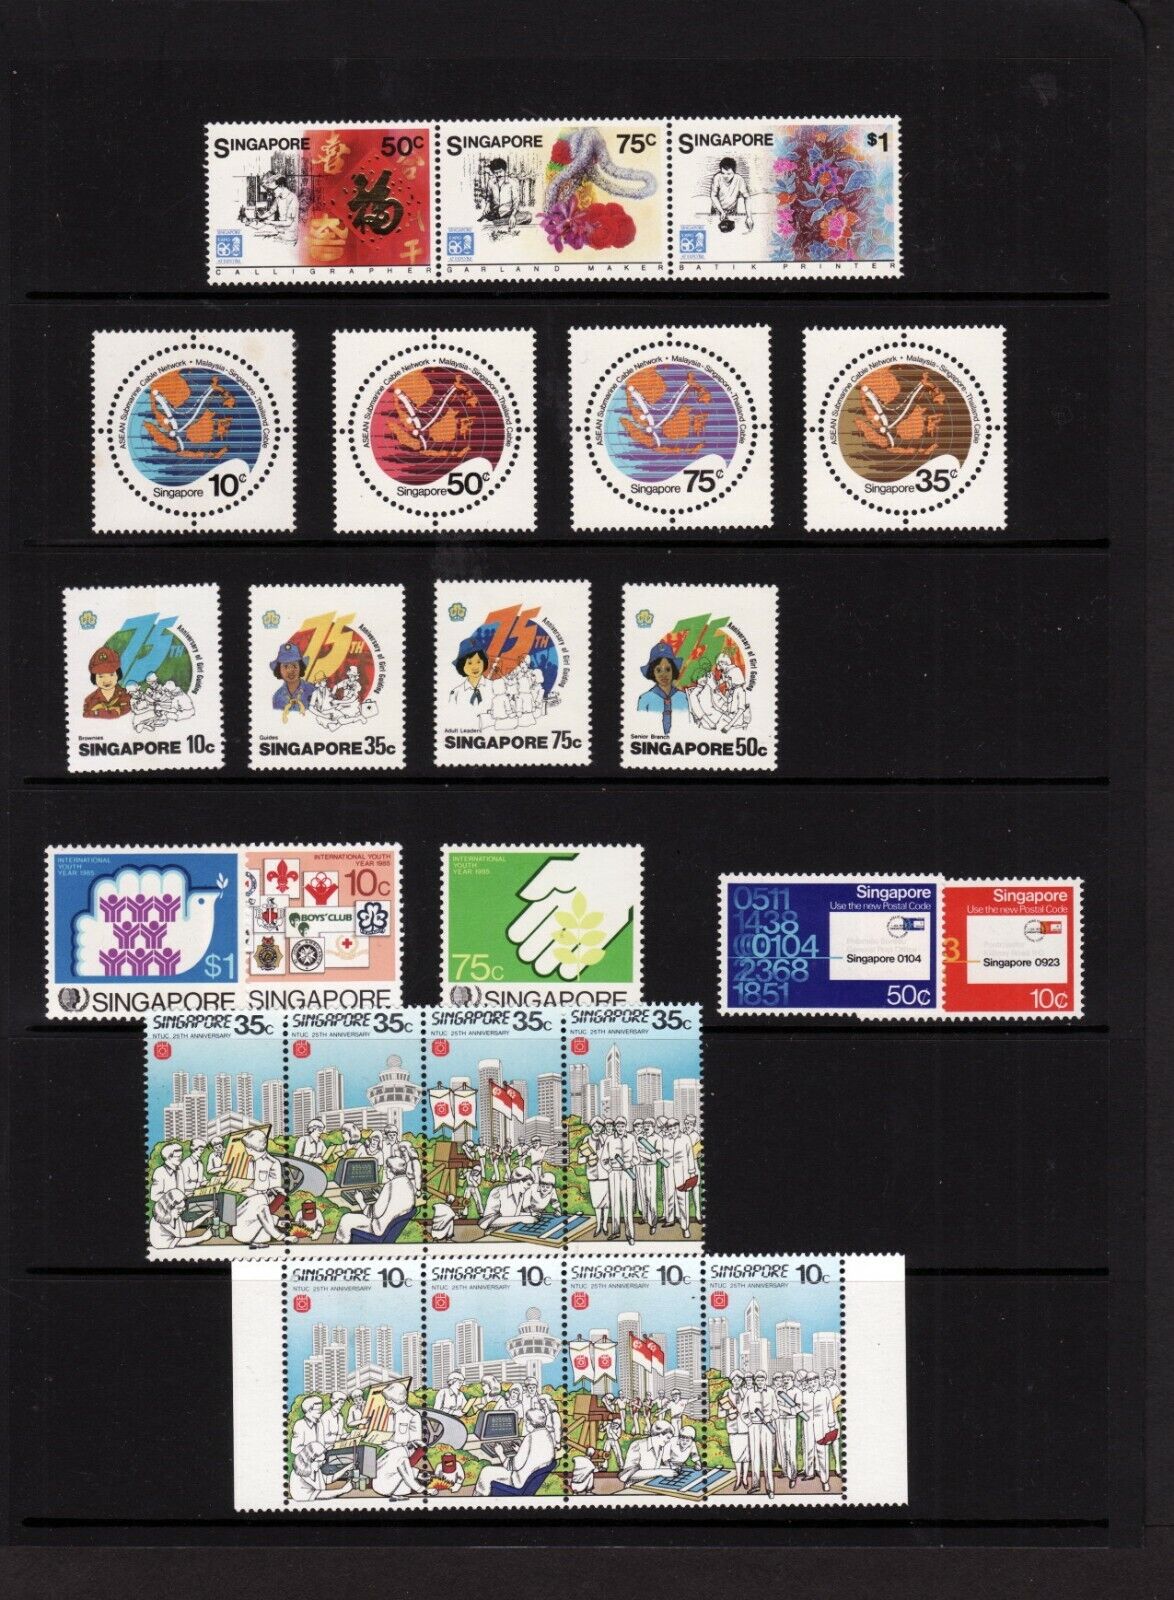 SINGAPORE 1979 POSTAL CODE to 1986 EXPO x 7 SETS STAMPS - FINE M